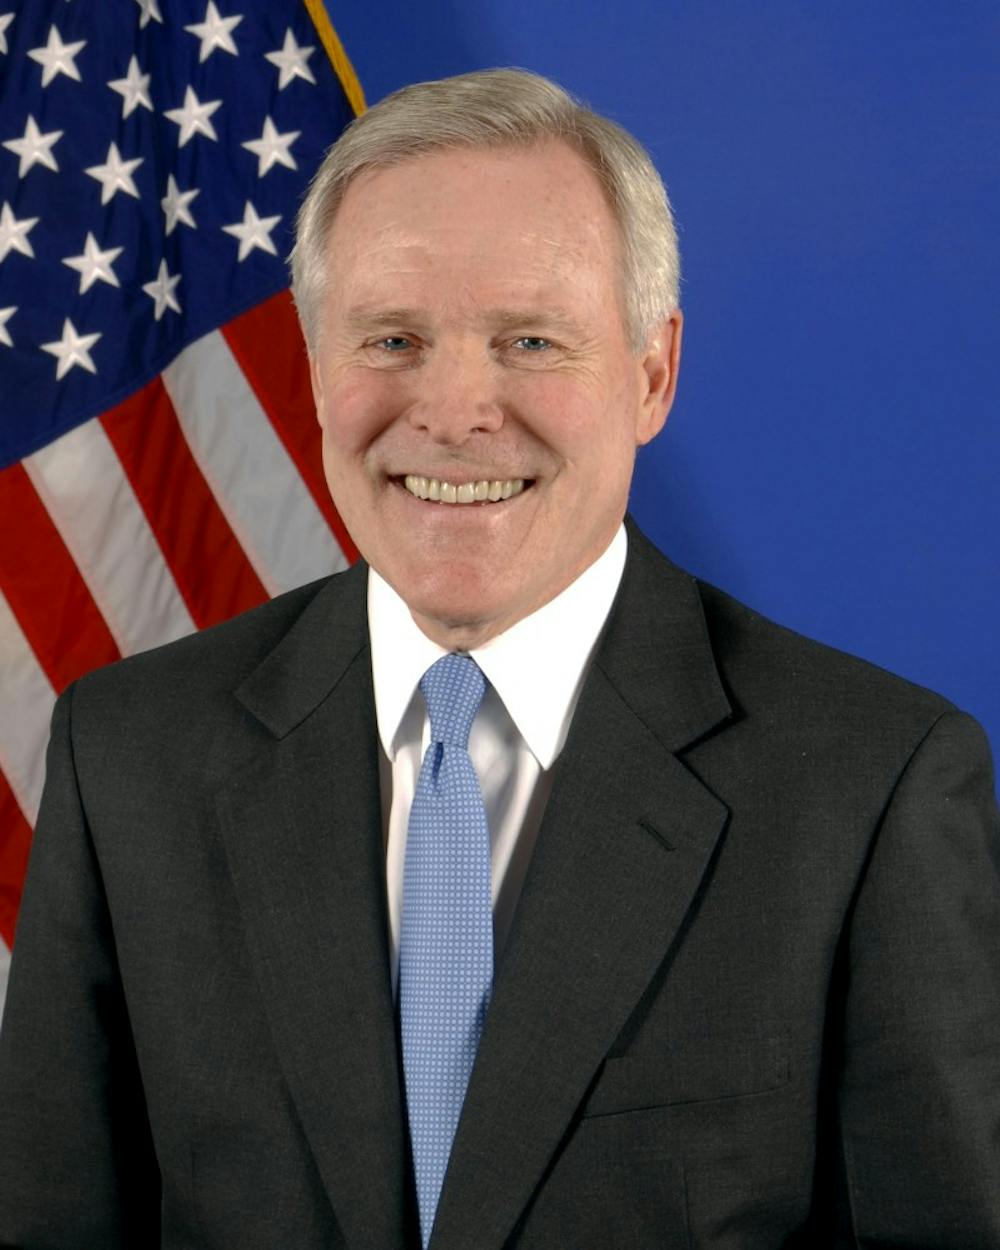 090519-N-0000X-001      Secretary of the Navy Ray Mabus.  DoD photo by the U.S. Navy.  (Released)